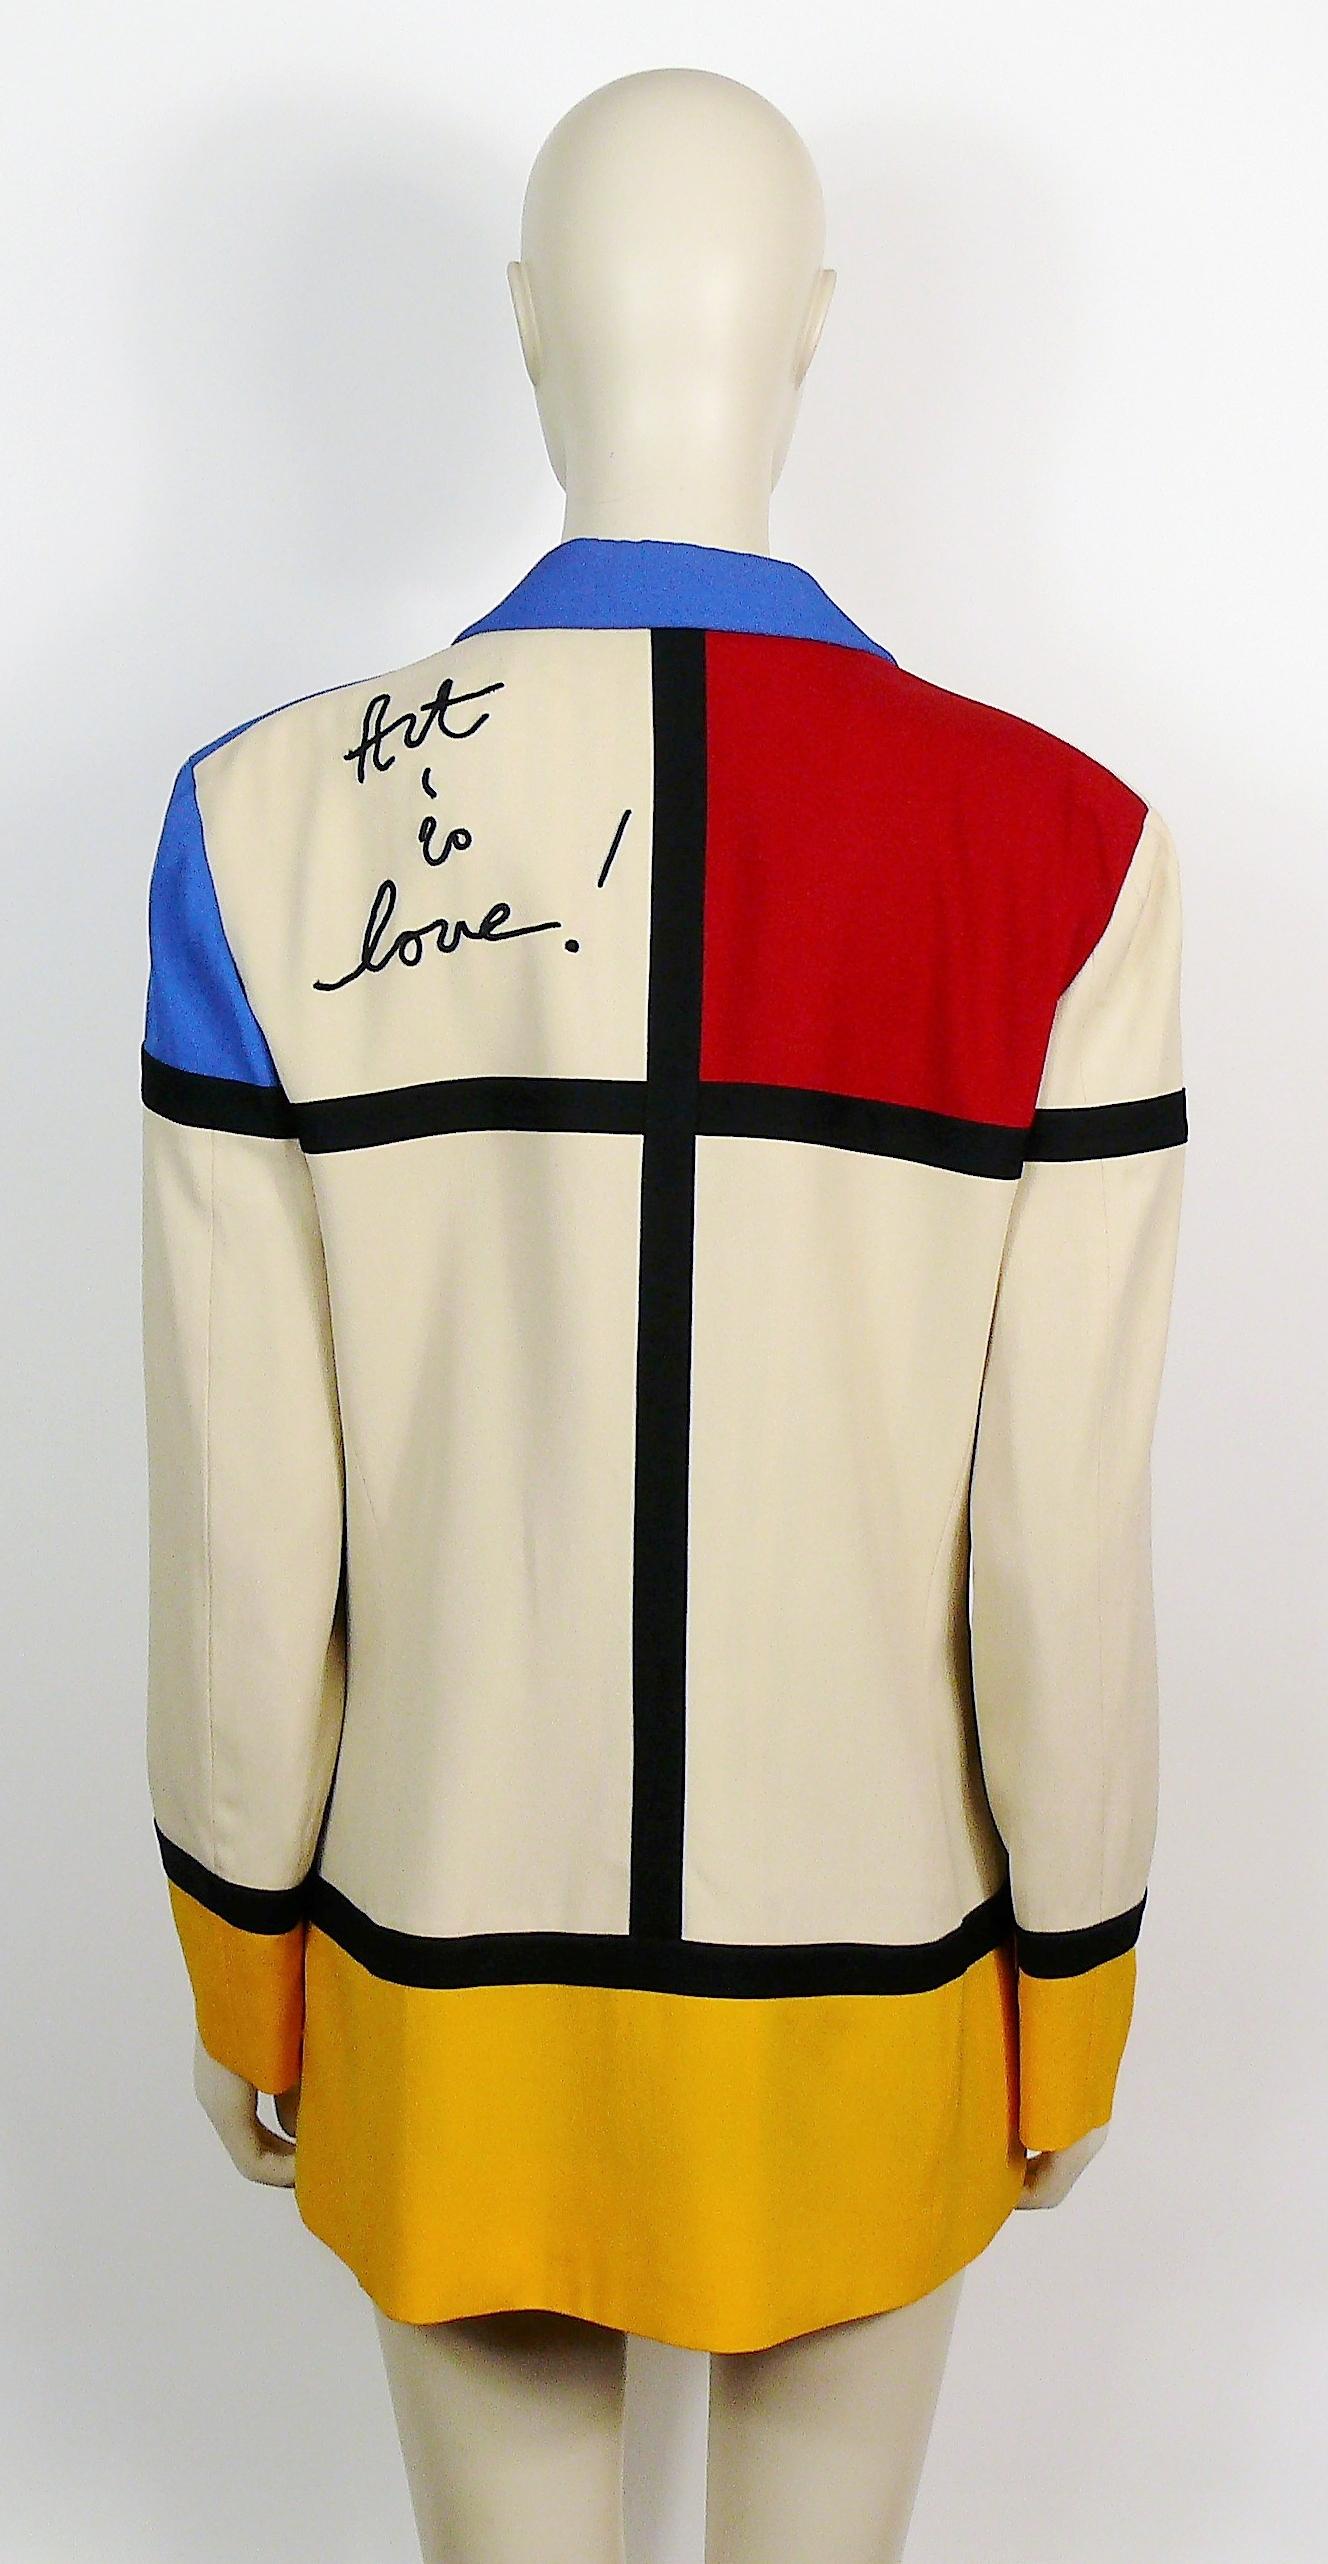 MOSCHINO vintage rare and iconic ART IS LOVE ! blazer. Tribute to the Dutch born artist PIET MONDRIAN.

This blazer features :
- PIET MONDRIAN inspired minimalist De Stijl Modern Art in red, blue and yellow color block design.
- Large heart on right